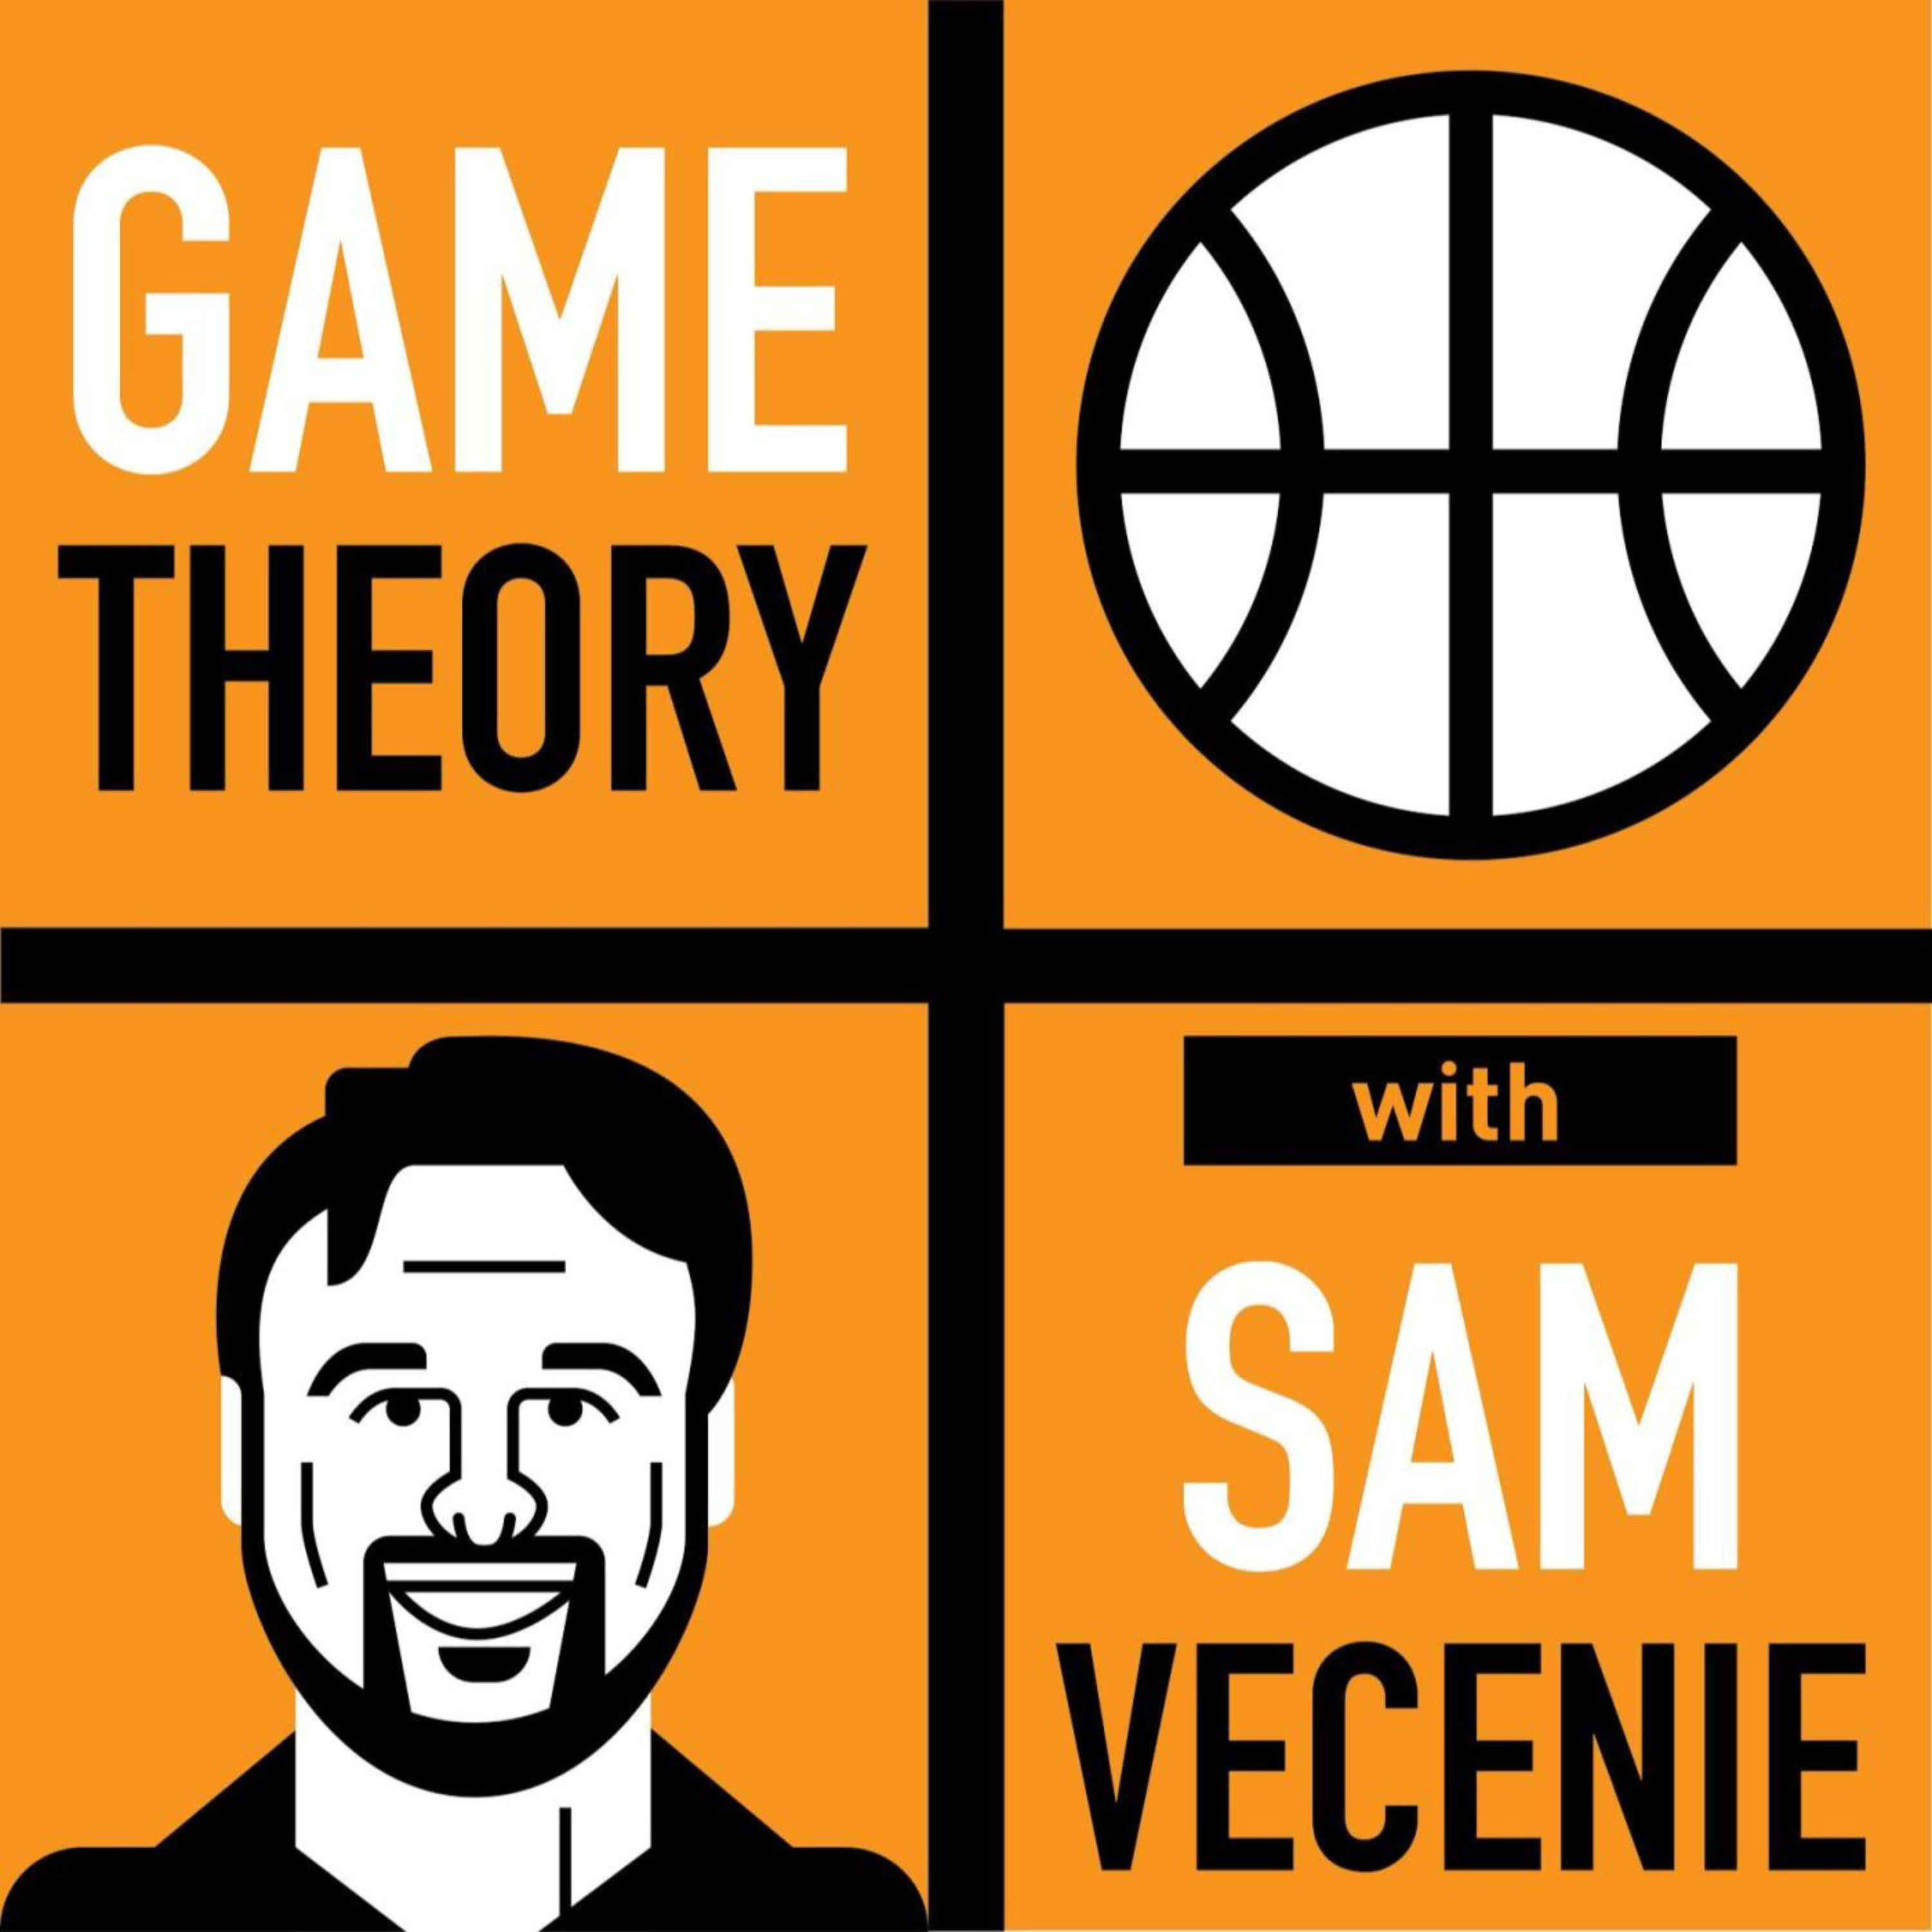 A highlight from 2022 NBA Mock Draft! The Game Theory boys break down what they would do at each pick